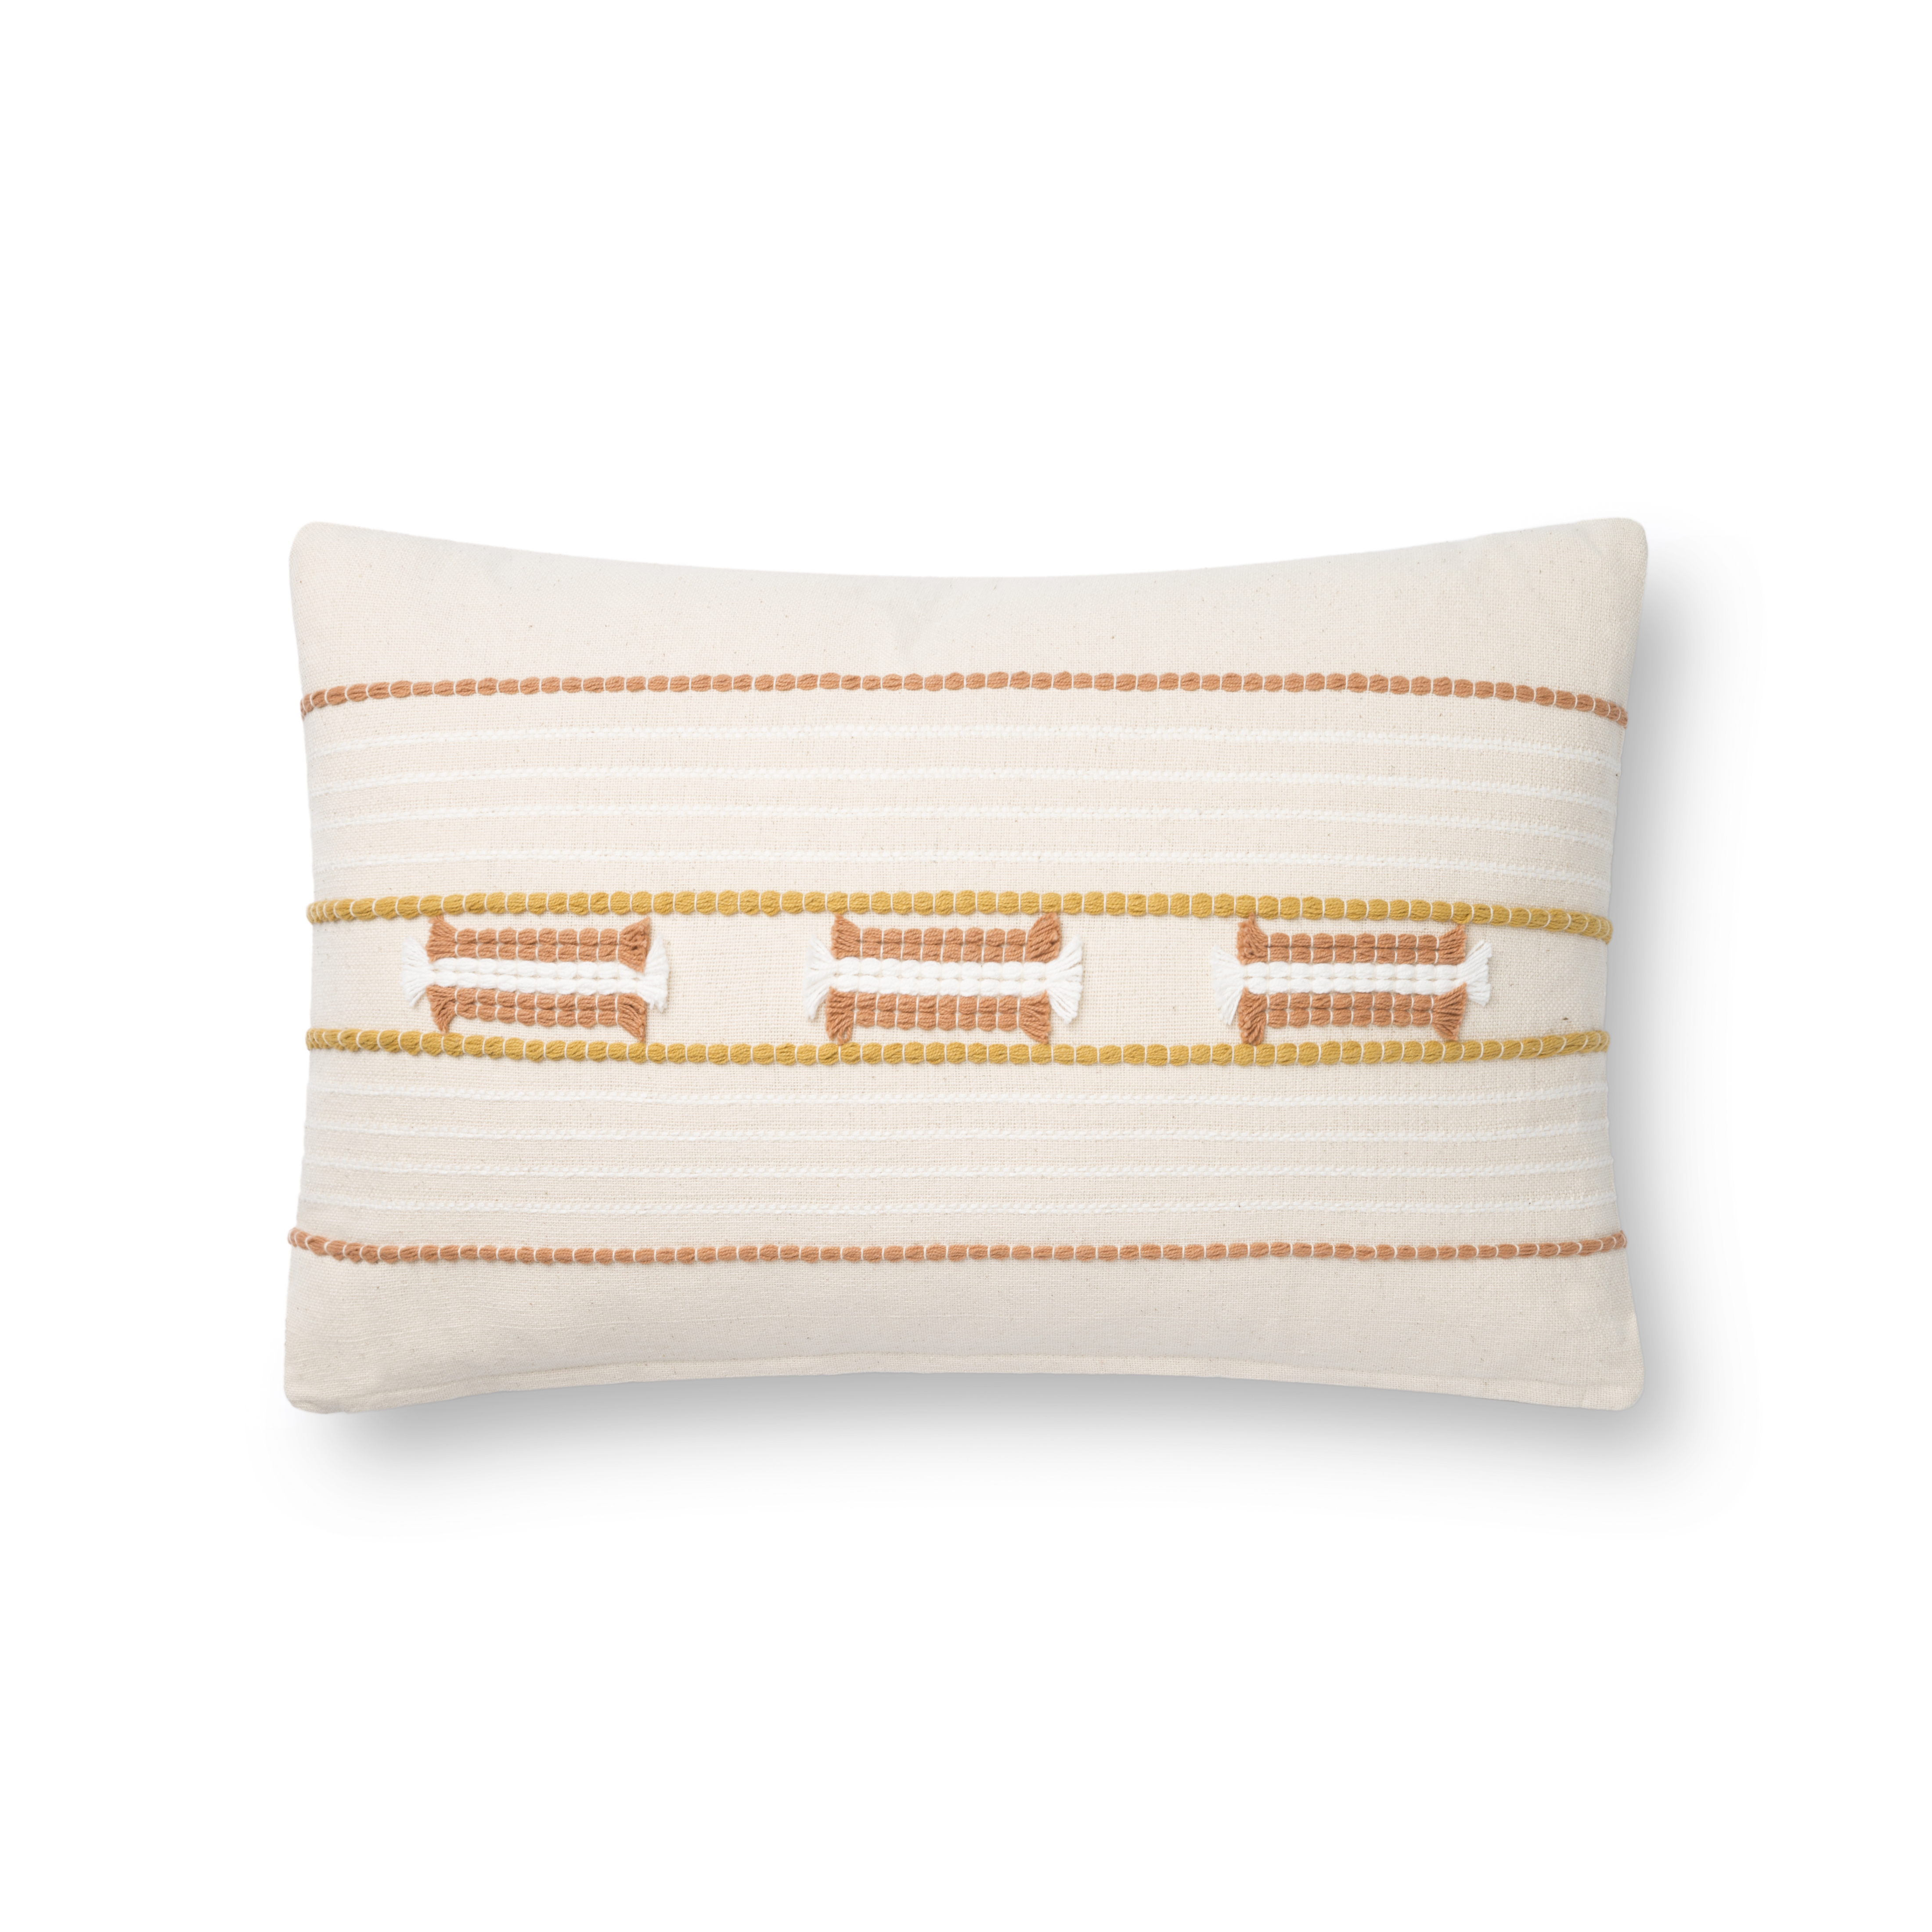 Magnolia Home by Joanna Gaines x Loloi Pillows P1141 Natural / Blush 13" x 21" Cover Only - Image 0